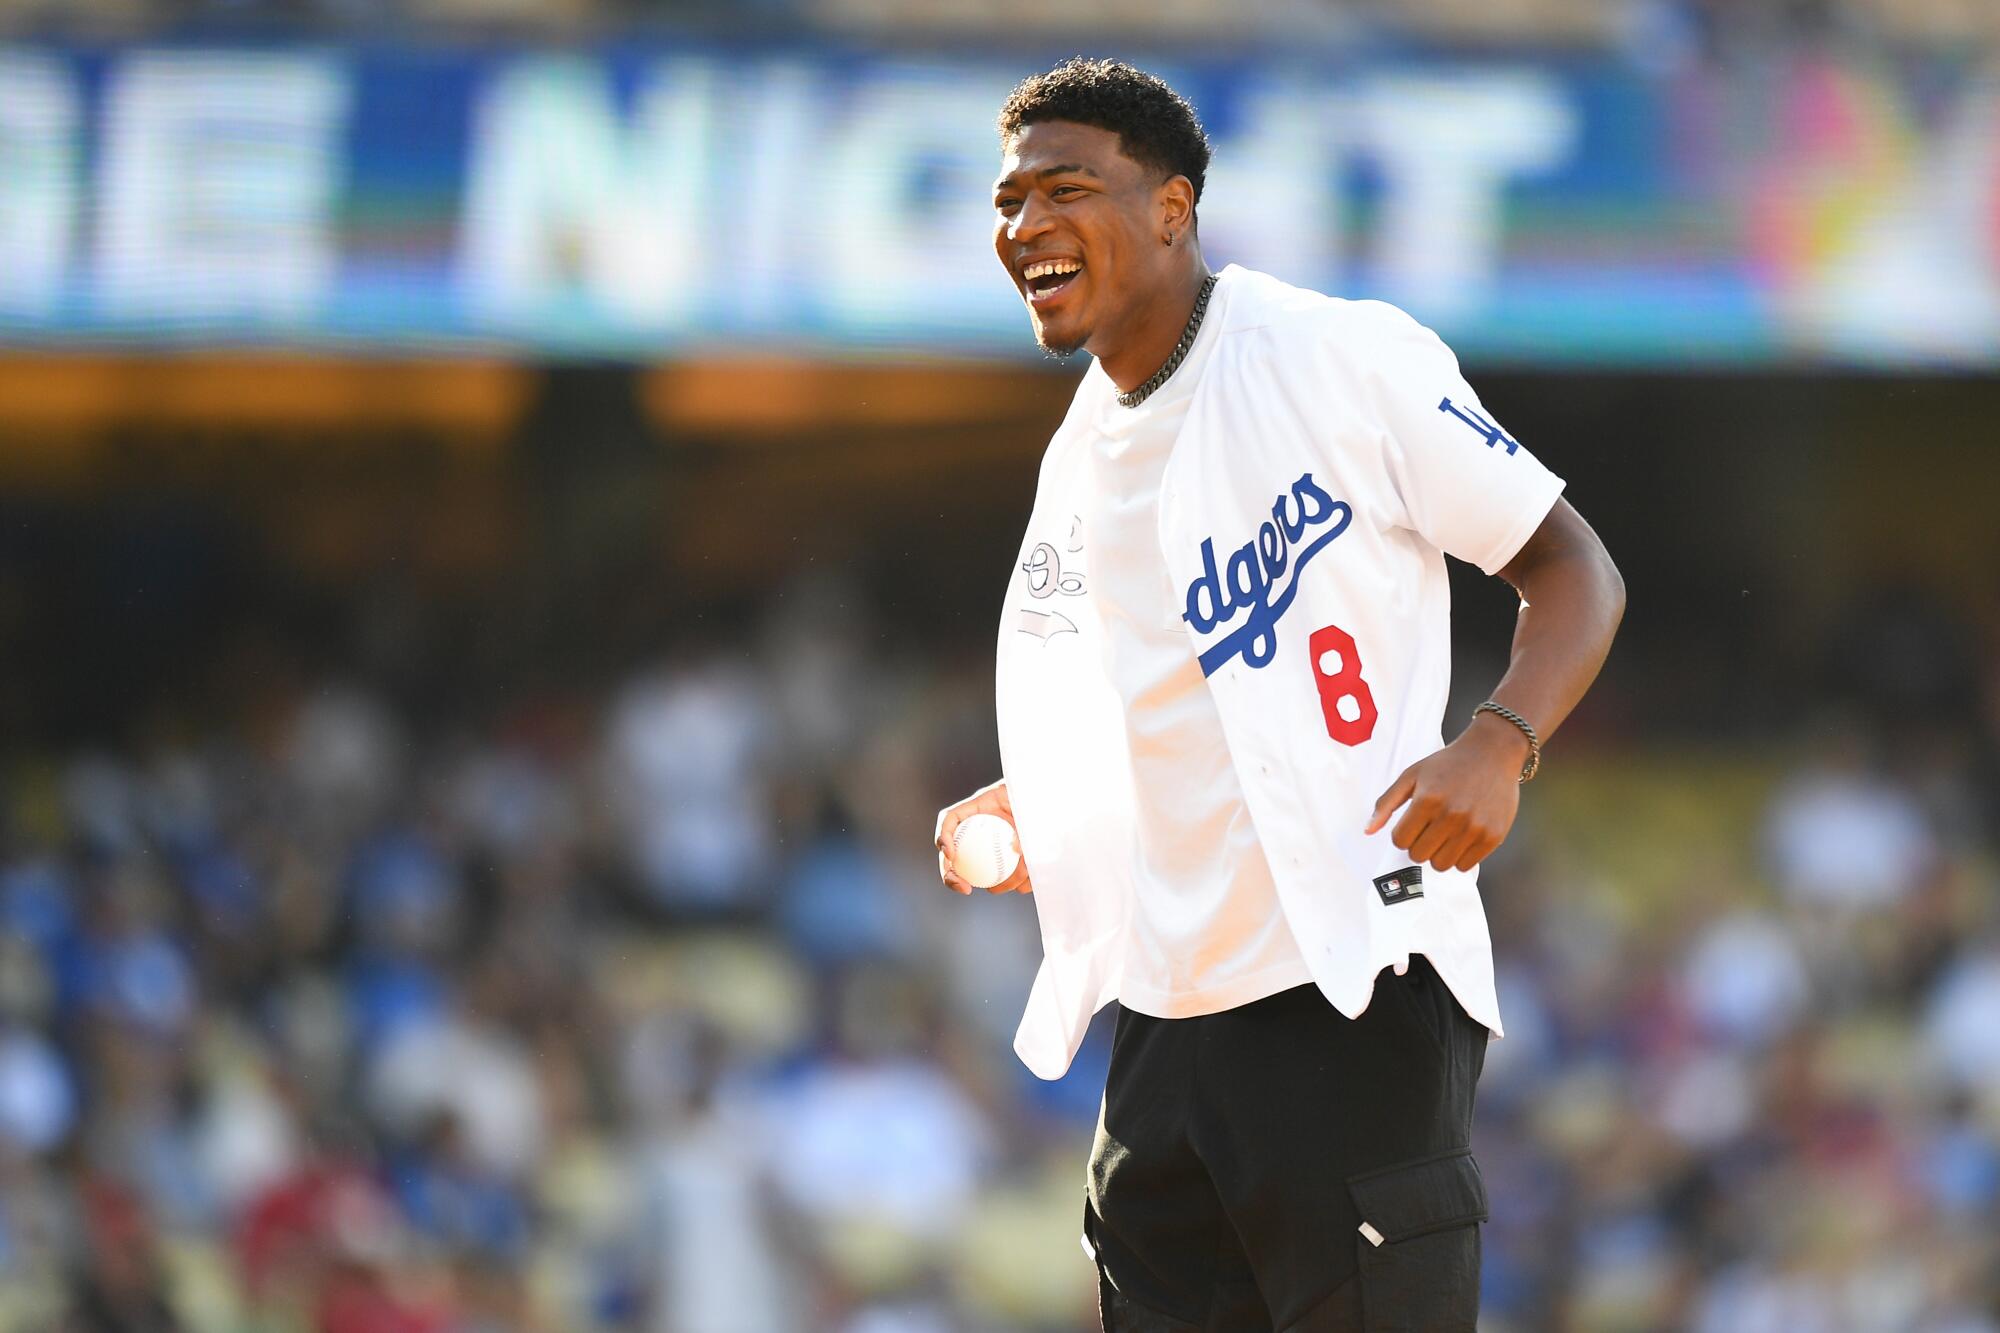 Lakers forward Rui Hachimura gets ready to throw out the first pitch before a Dodgers-Angels game in July at Dodger Stadium.